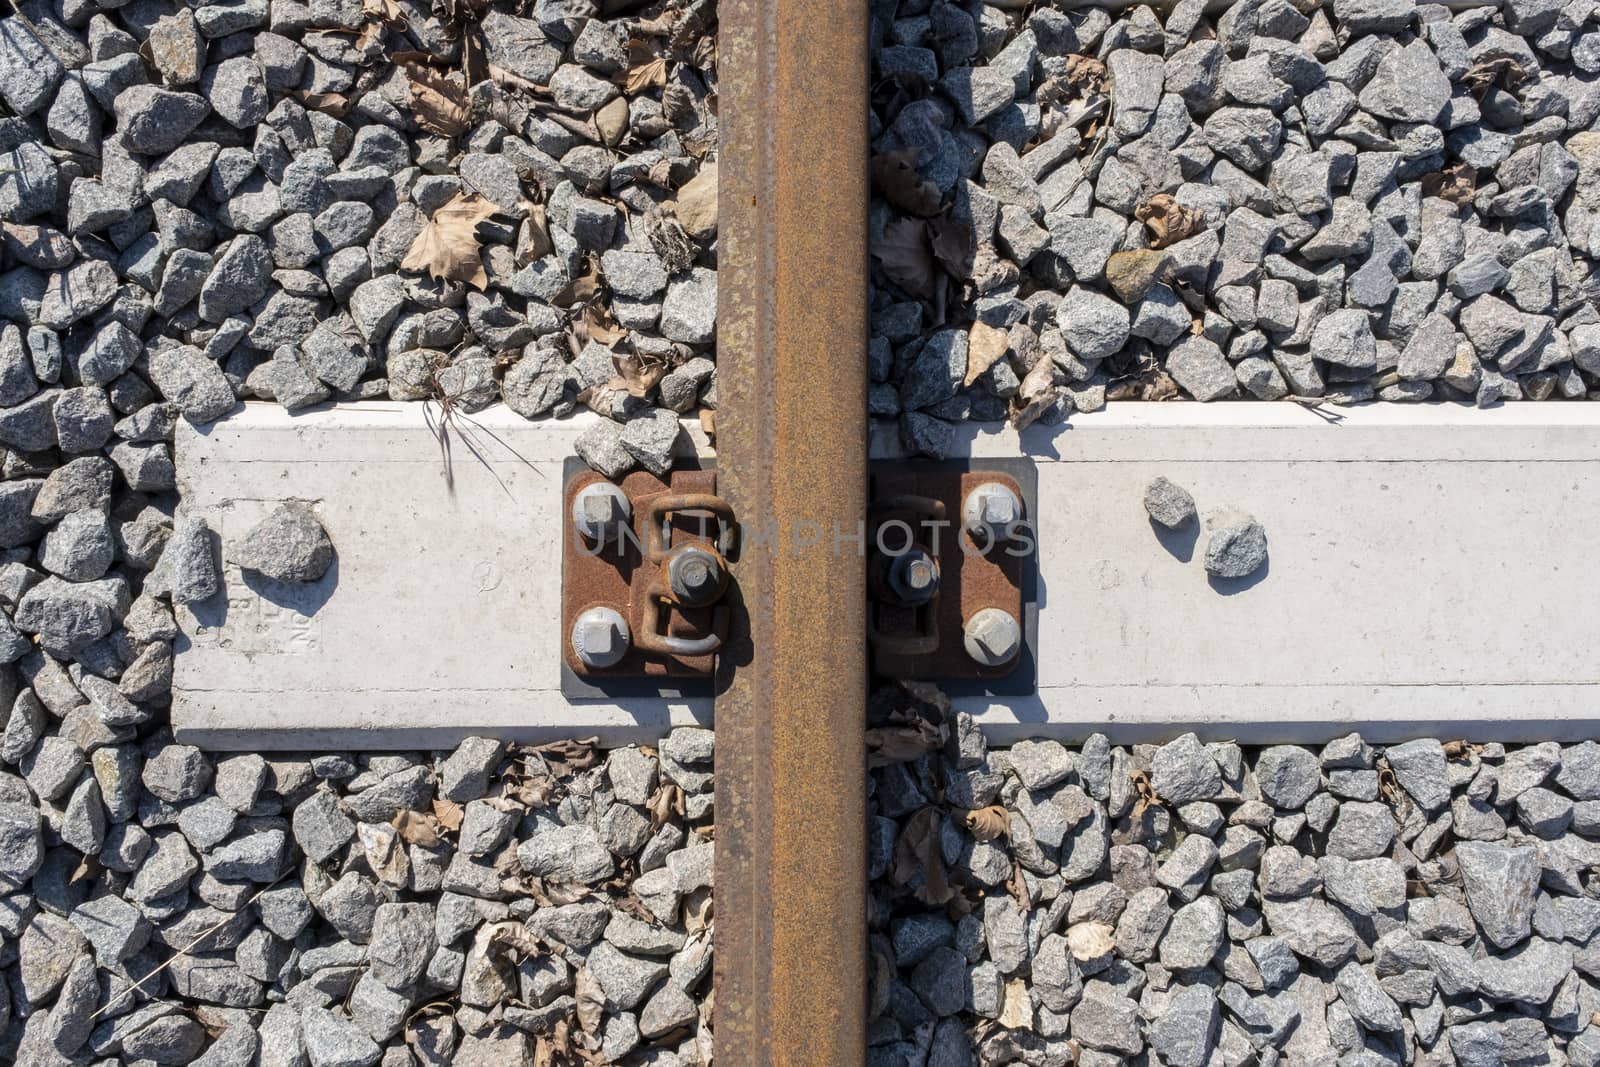 Train Tracks Detail from Above. Close up by Tjeerdkruse